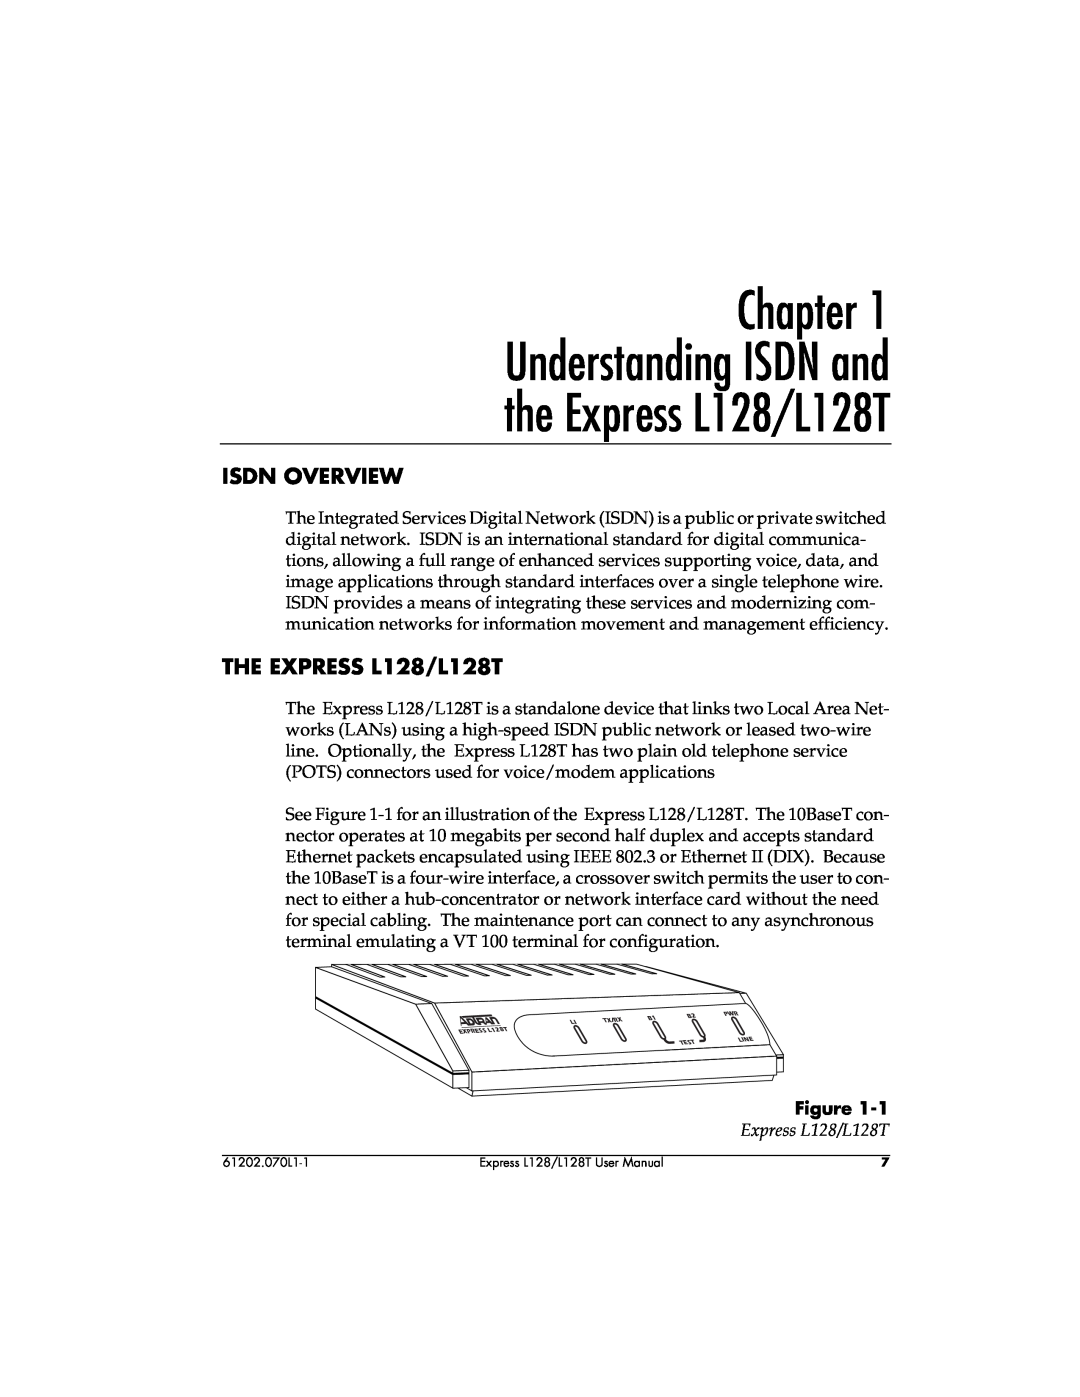 ADTRAN user manual Chapter Understanding ISDN and the Express L128/L128T, Isdn Overview, THE EXPRESS L128/L128T 